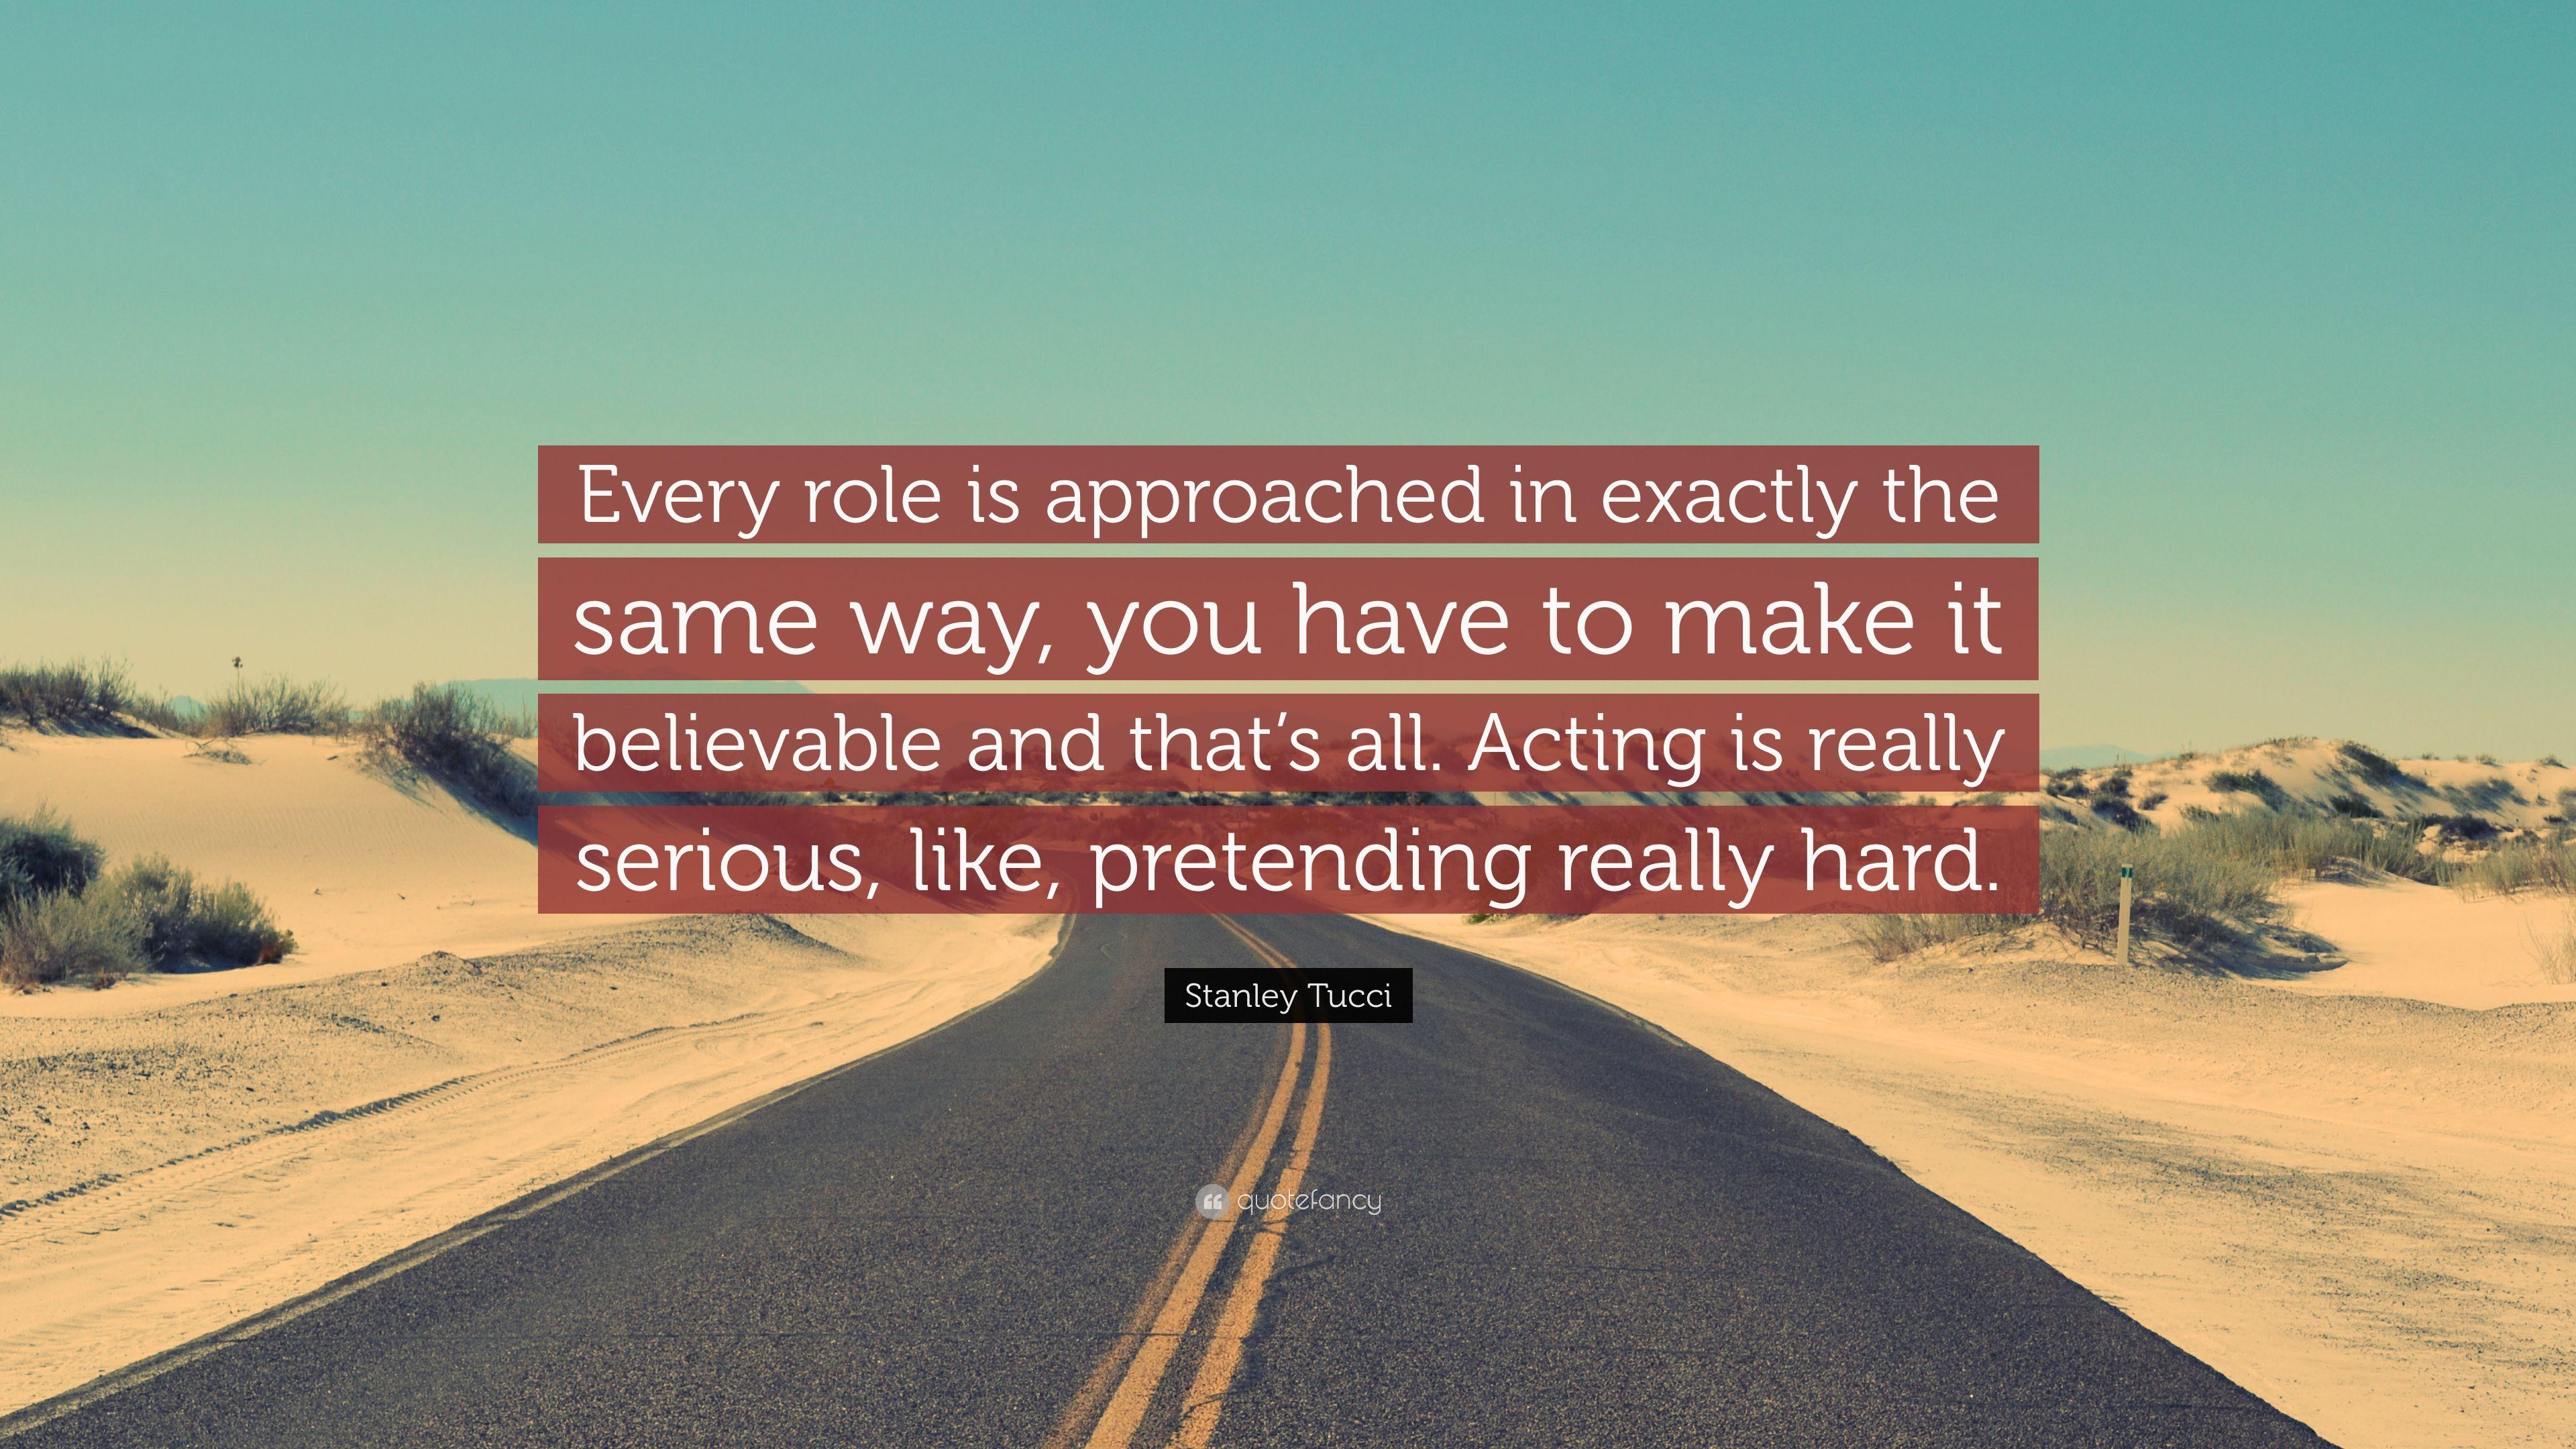 Stanley Tucci Quote: “Every role is approached in exactly the same